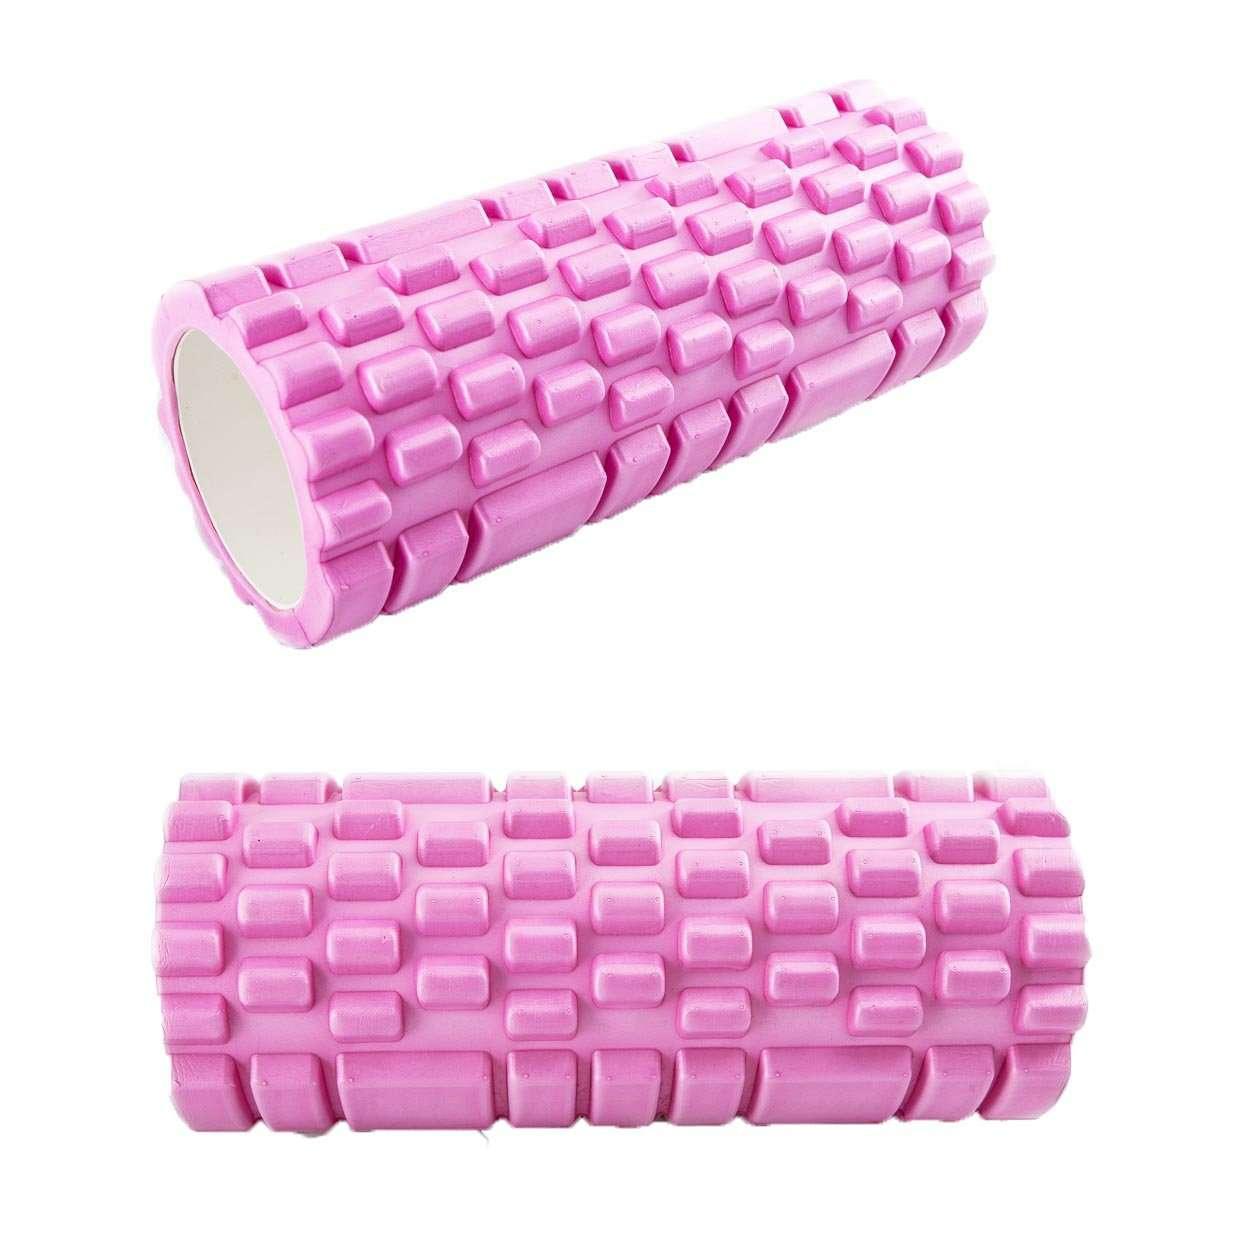 FH Pro Foam Roller - Muscle Recovery Massage - Fitness Health 